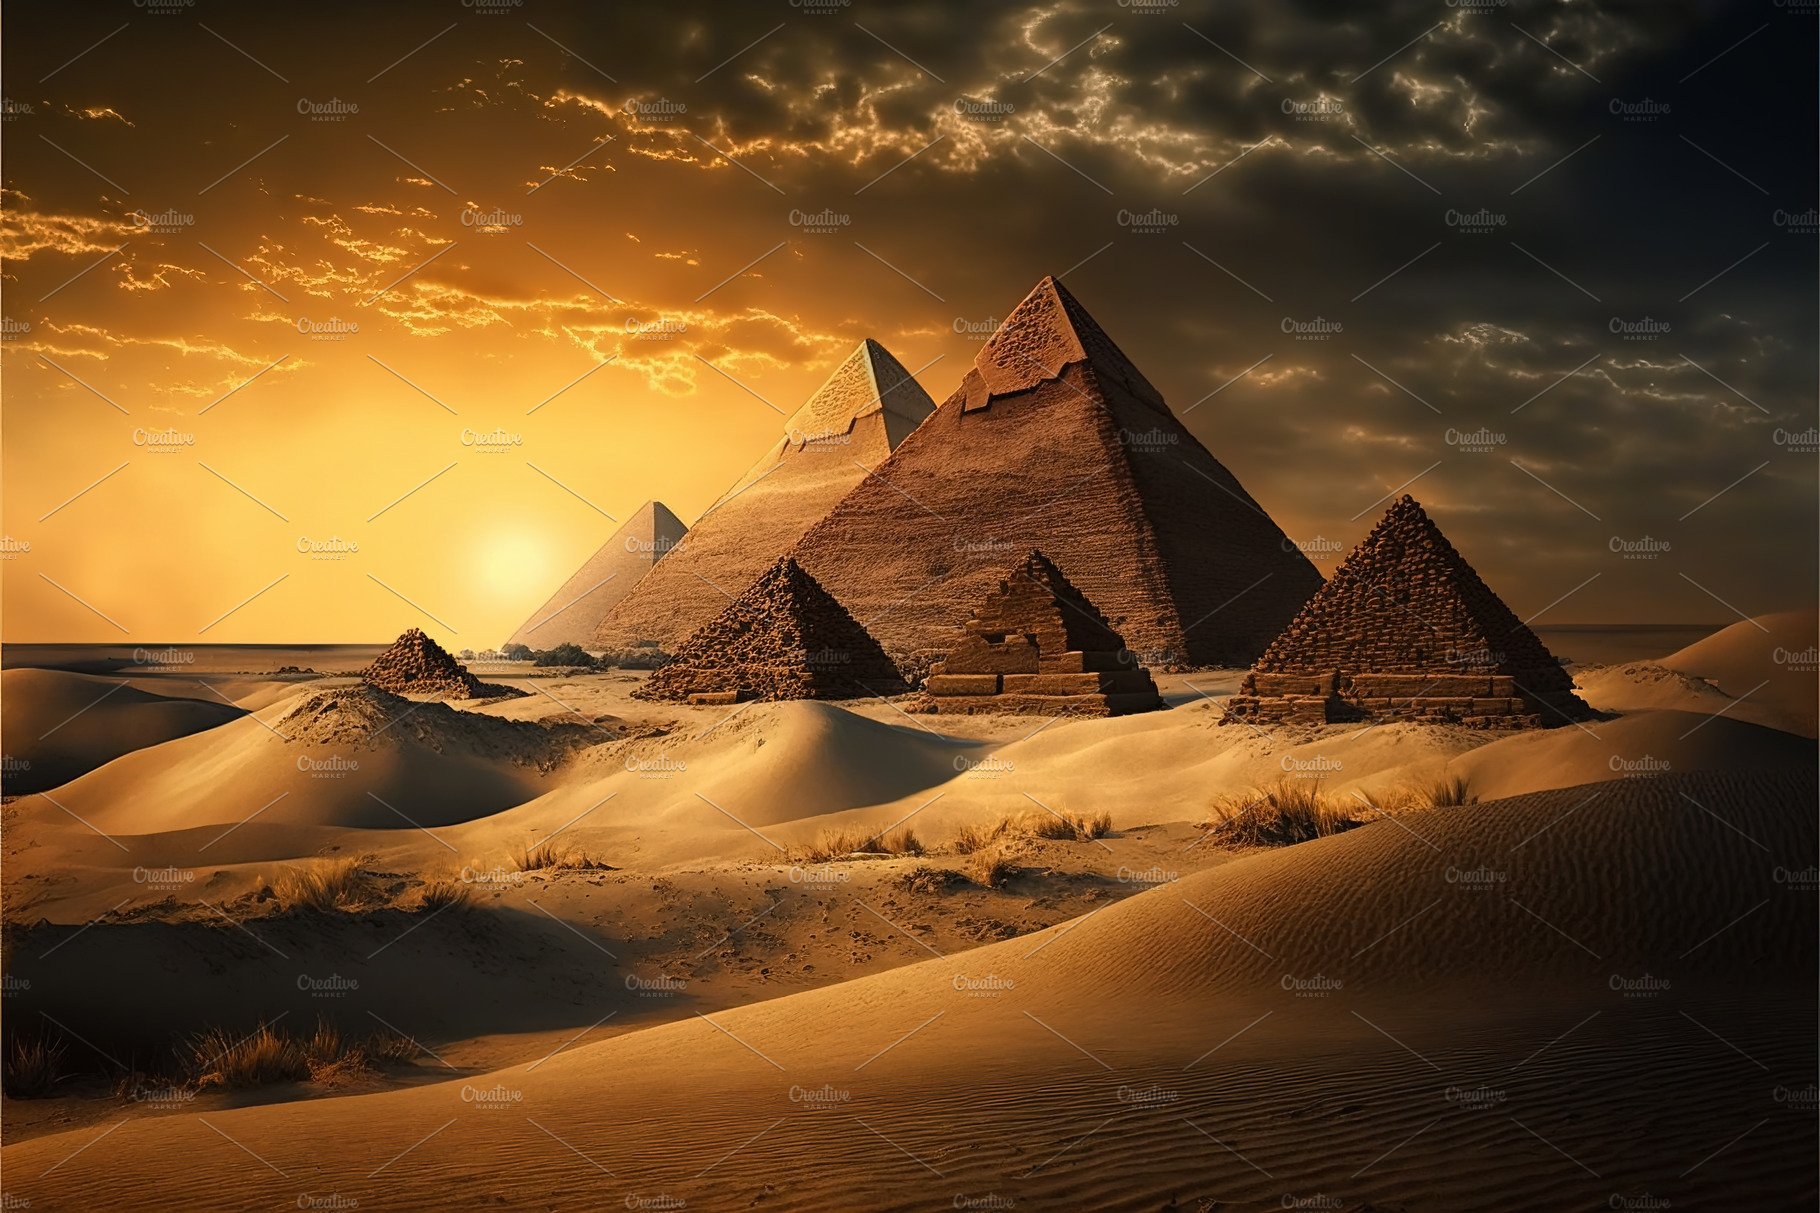 Pyramids at sunset, Cairo, Egypt cover image.